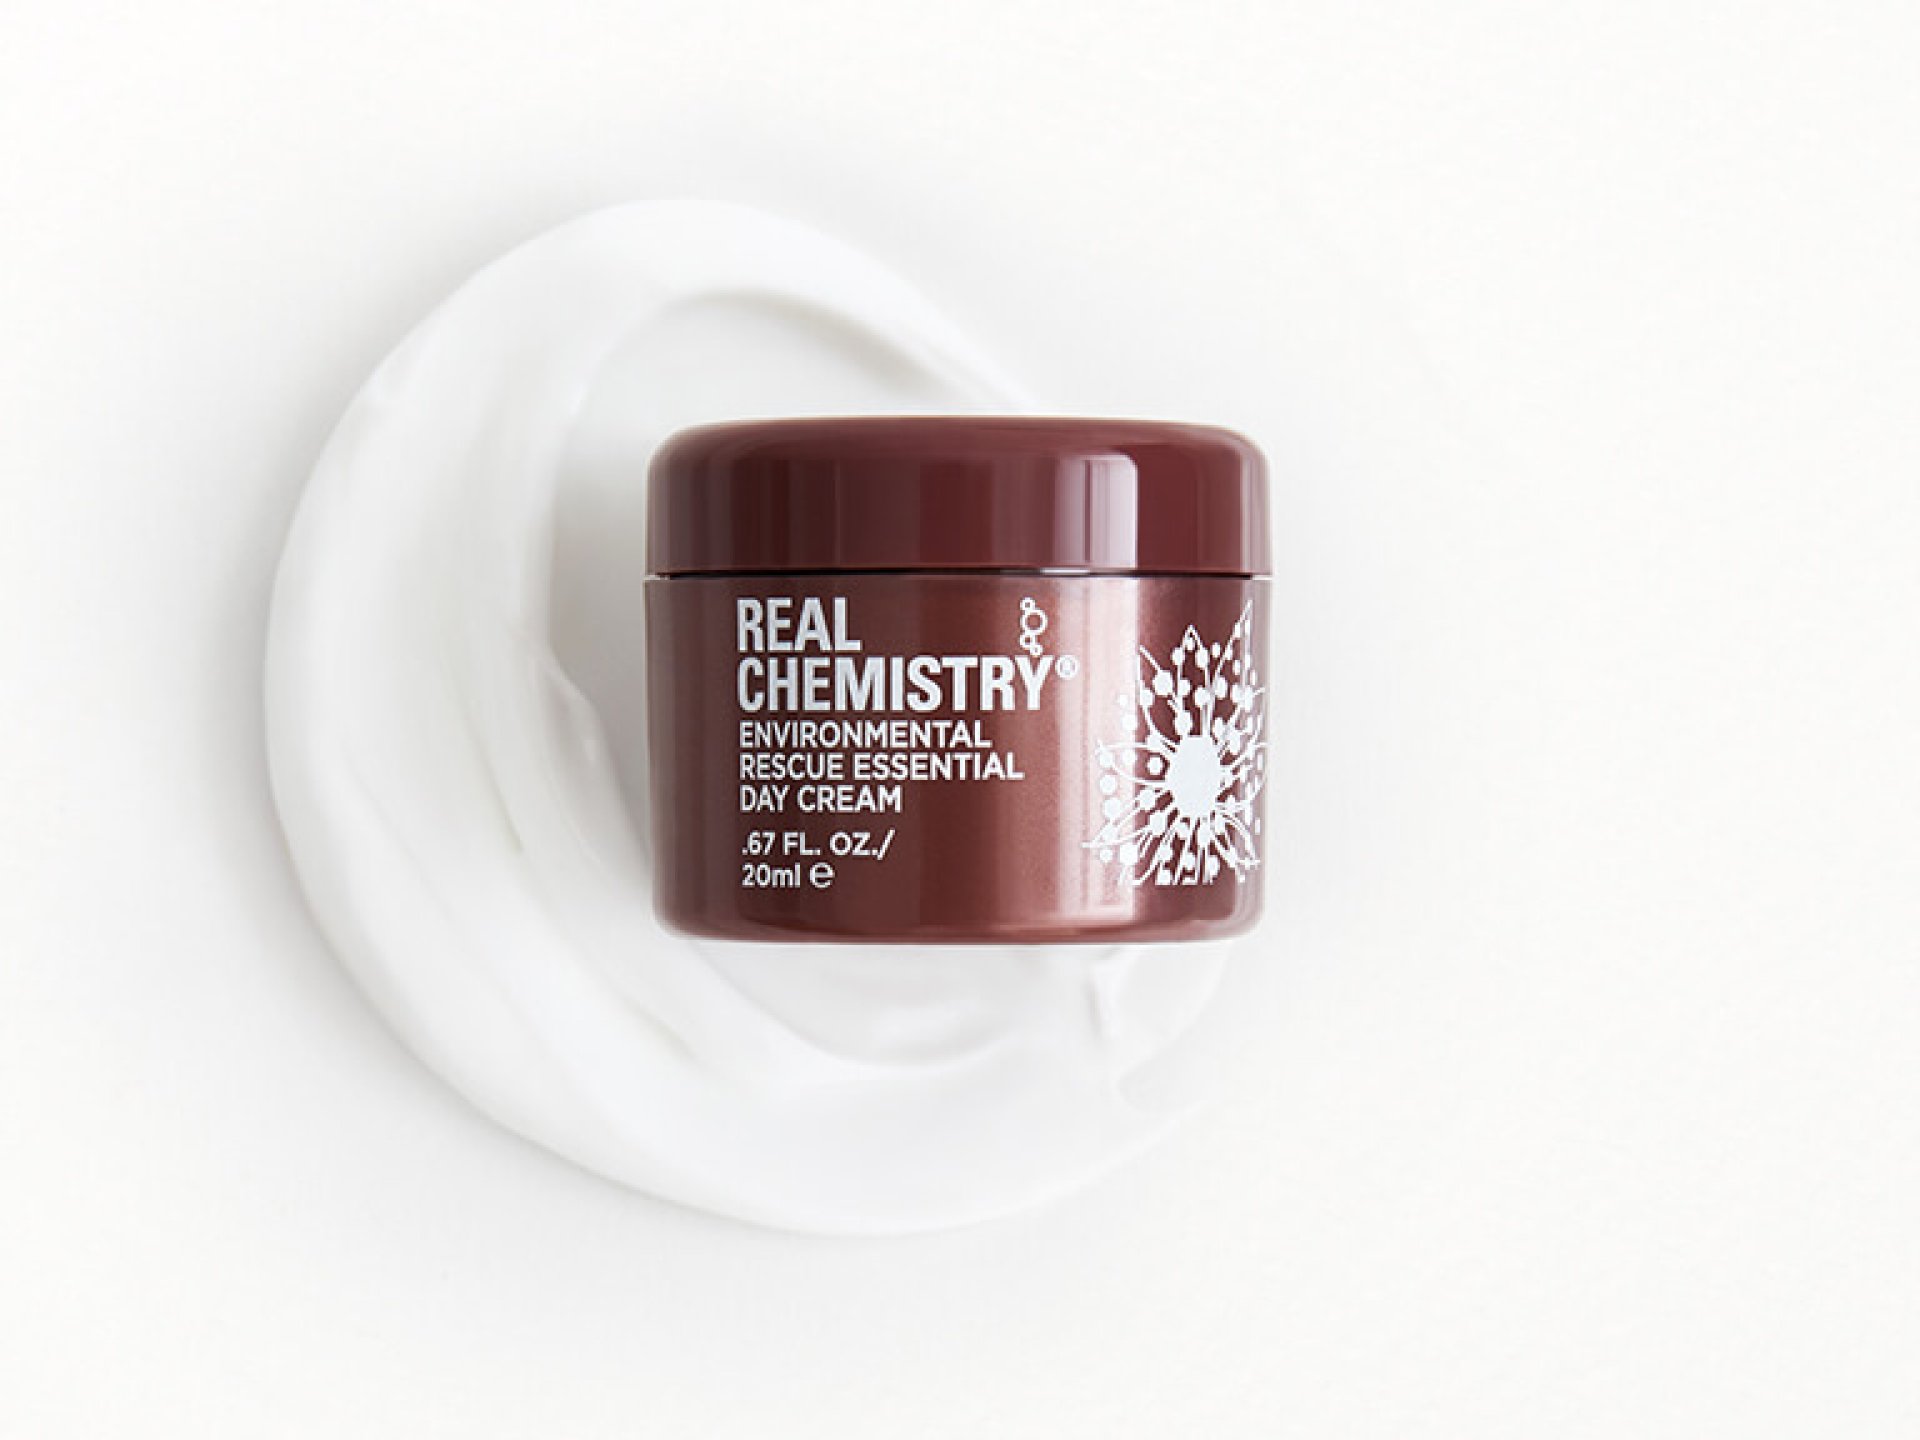 REAL CHEMISTRY Environmental Rescue Essential Day Cream